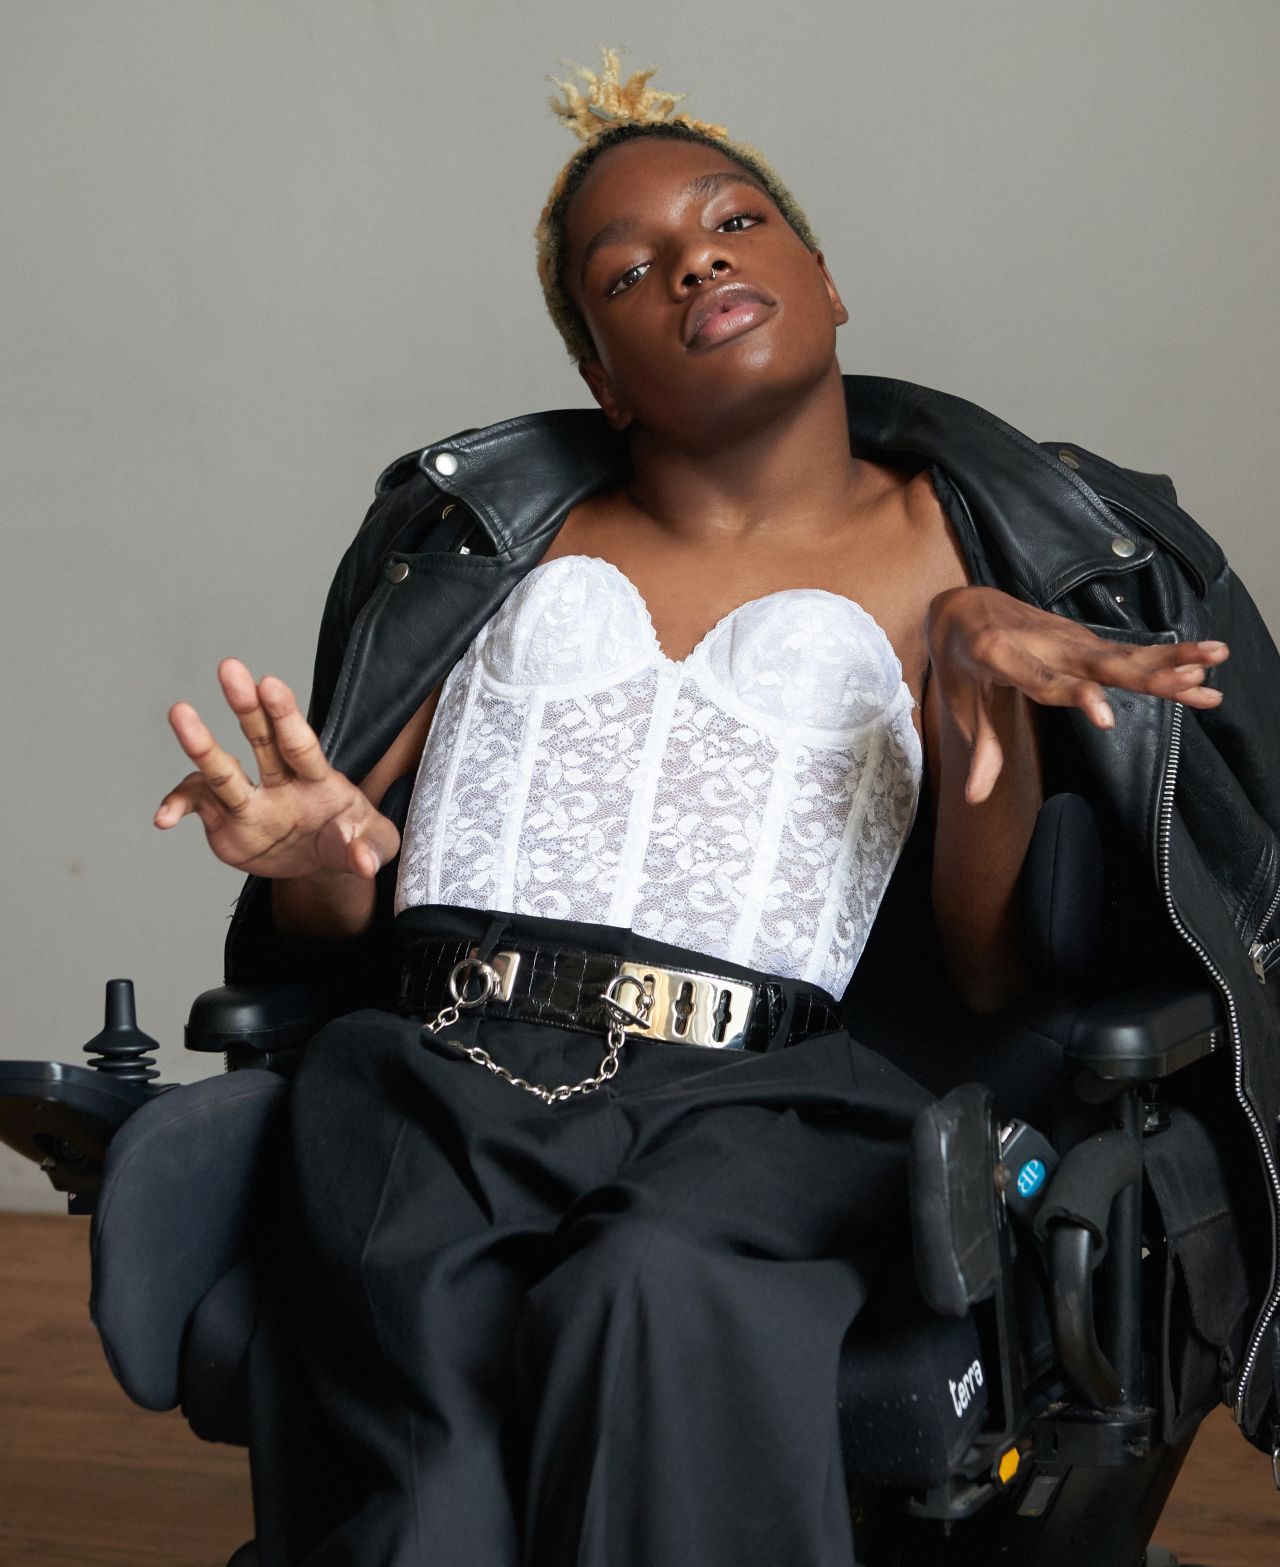 "There's still a great lack of visibility and attention towards people with disabilities in fashion," Philip said.